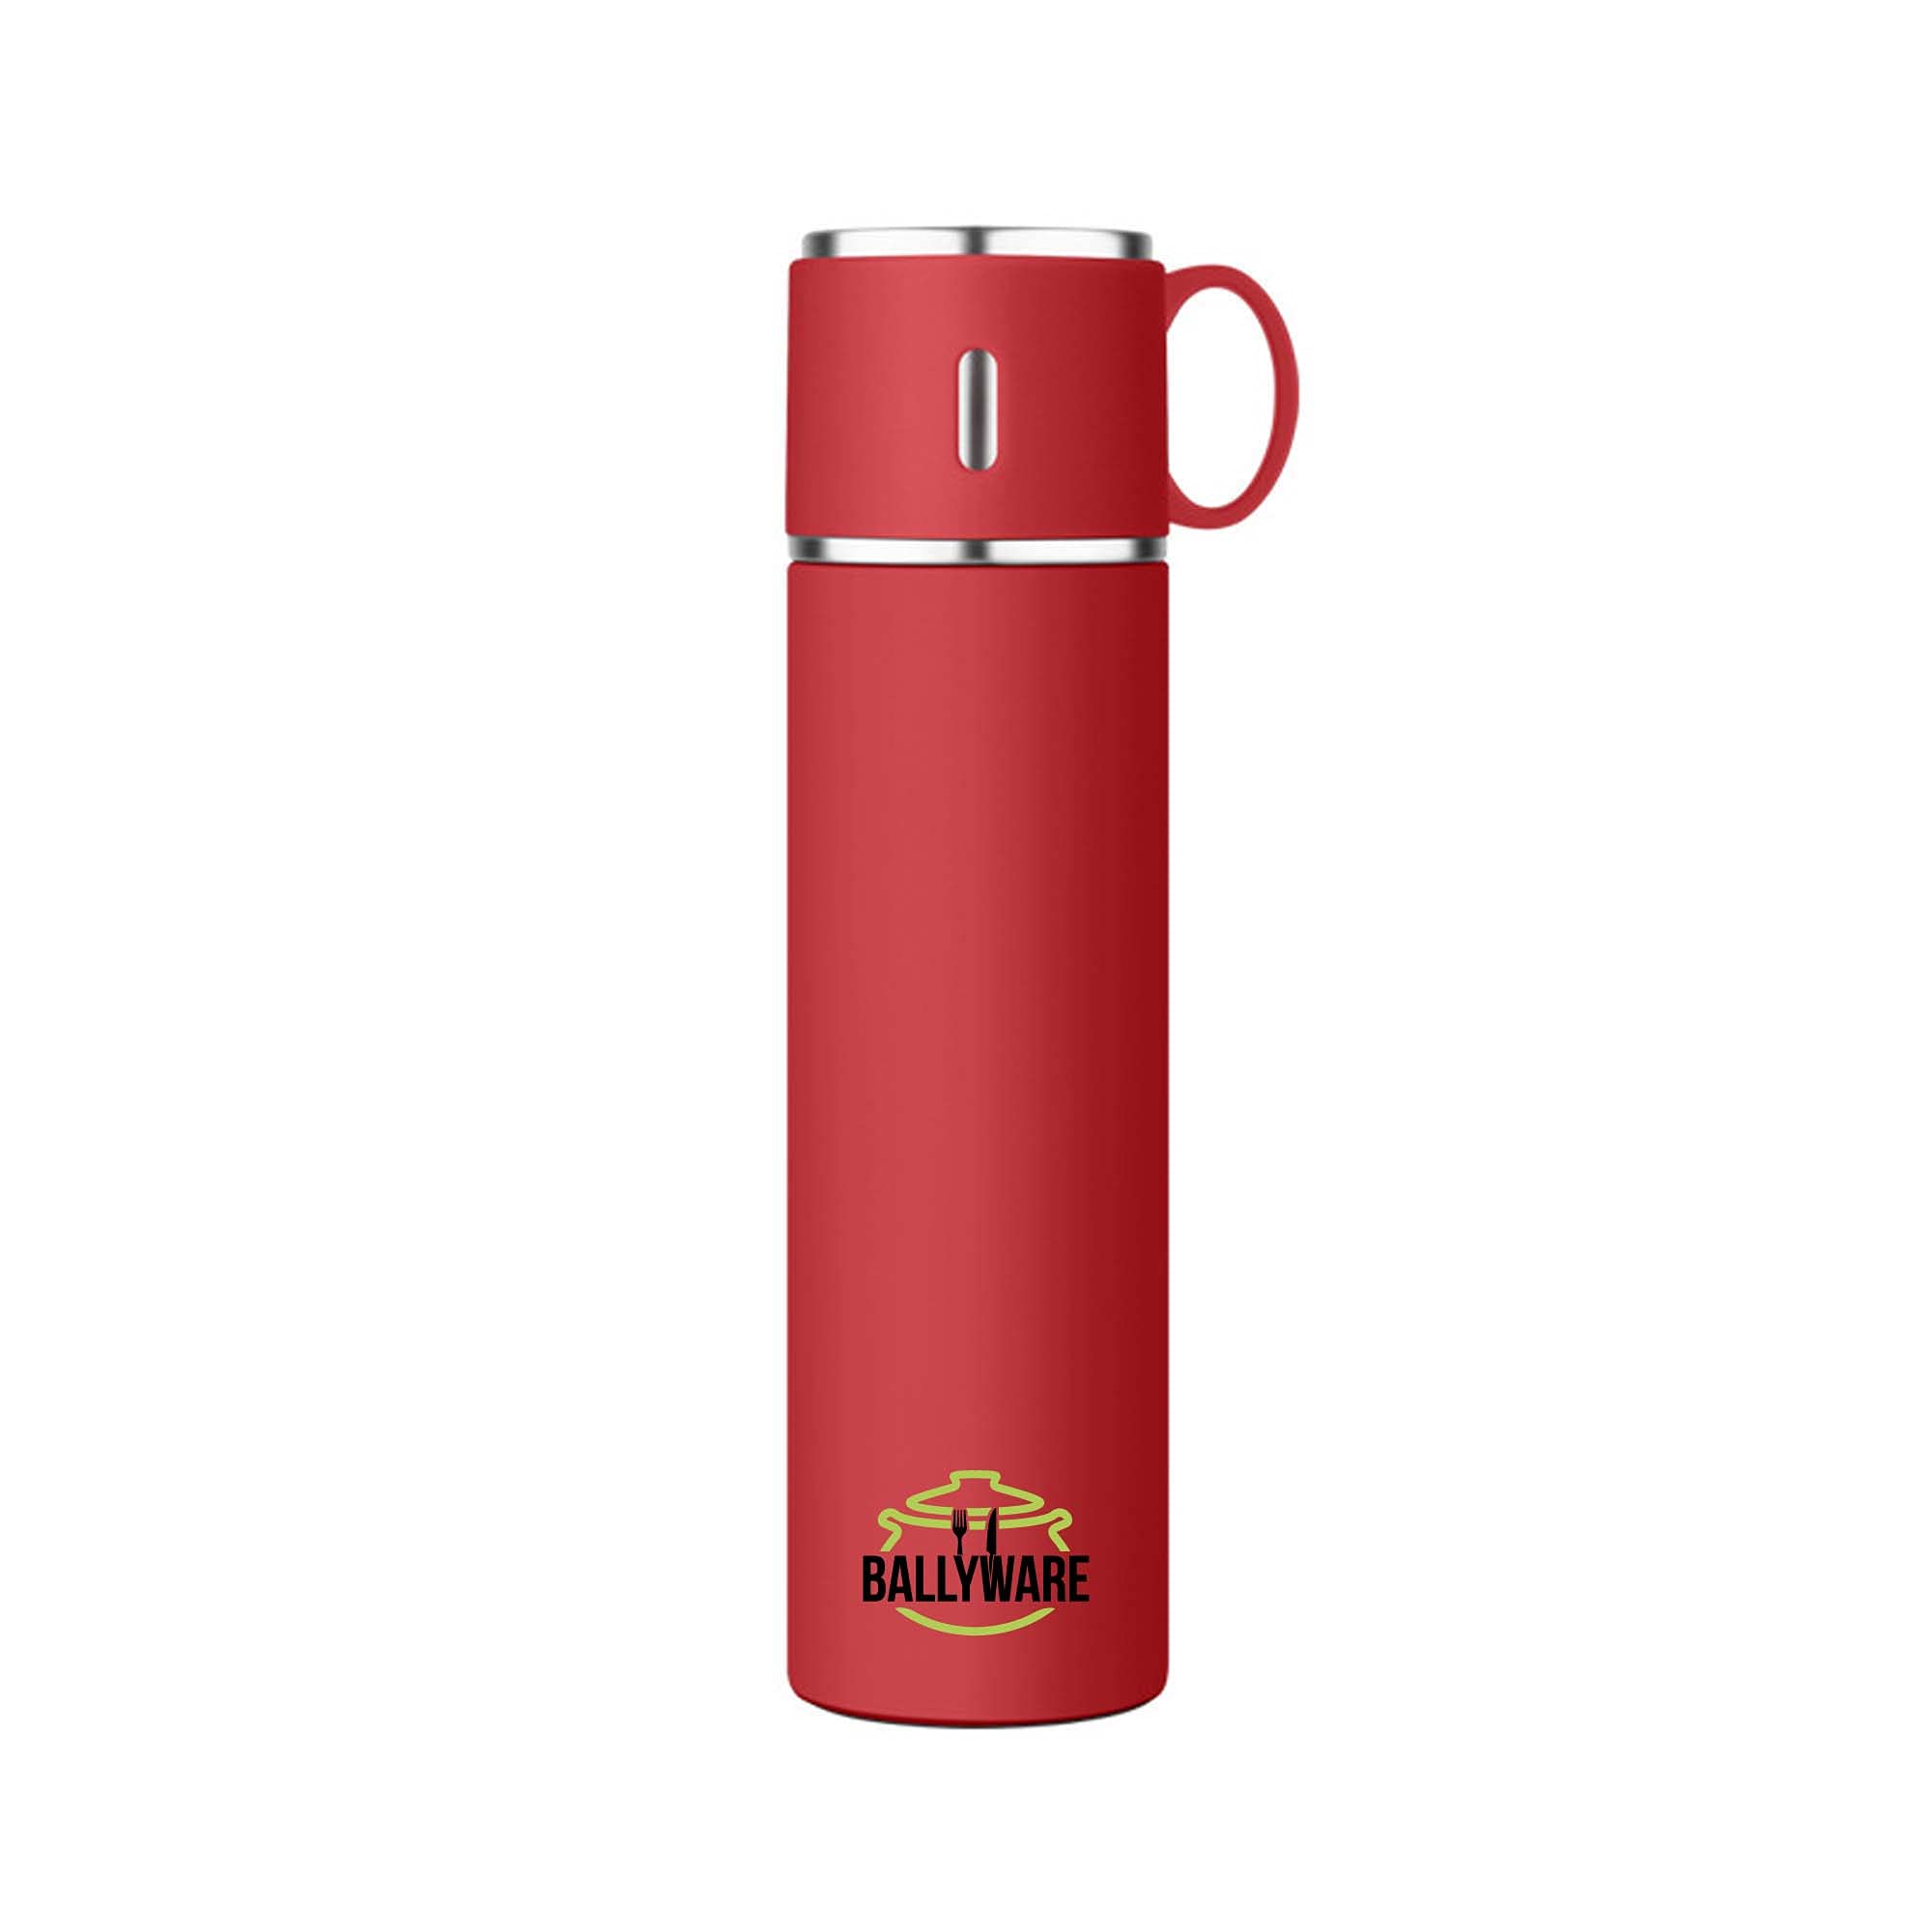 Ballyware 20oz Stainless Steel Vacuum Insulated Flask, Leak Proof Thermos For Hot Drinks With Cup - For Indoor and Outdoor (Red)